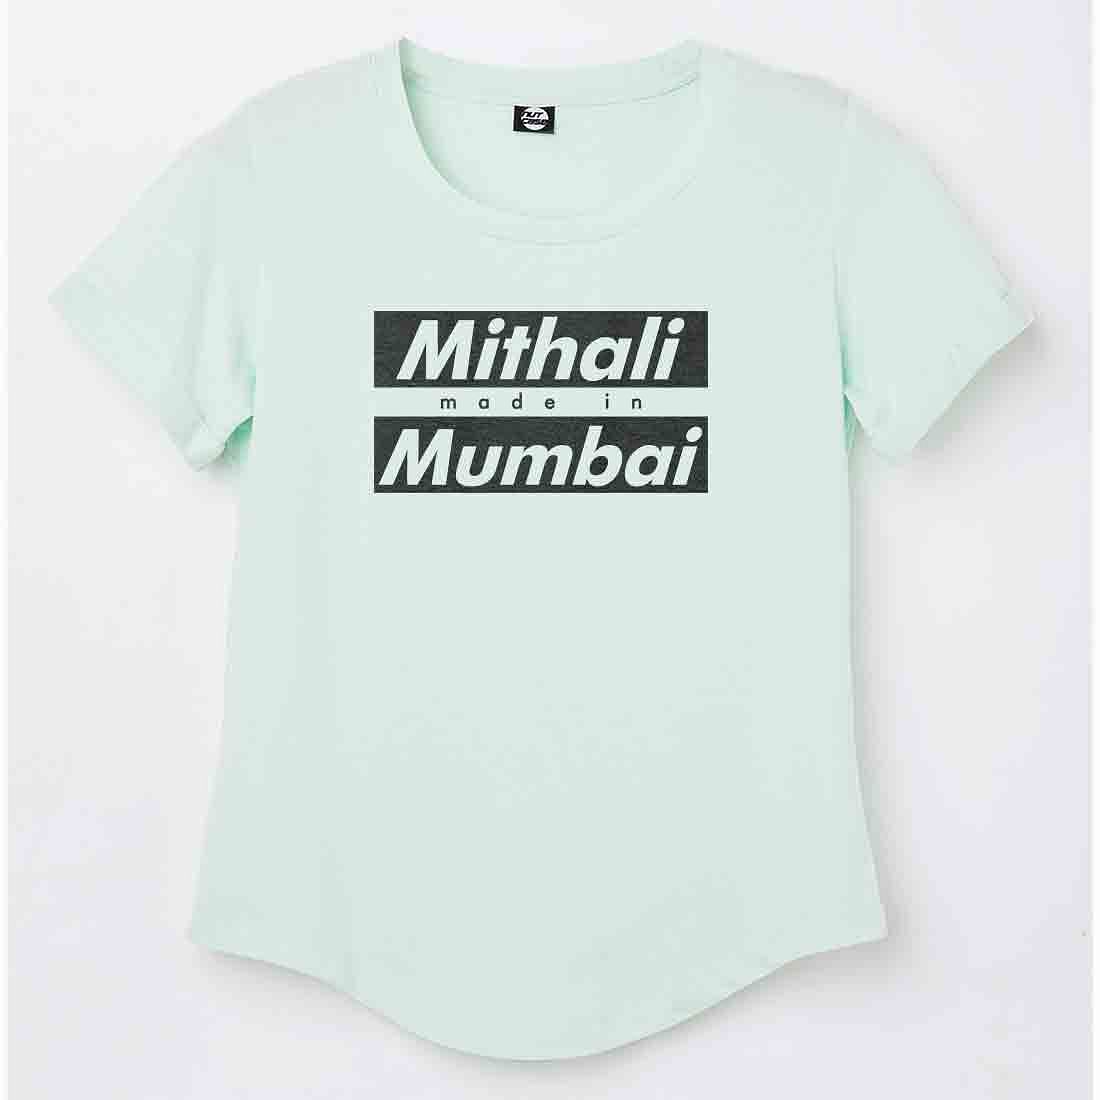 Personalized Tee For Women - Made in Mumbai Nutcase